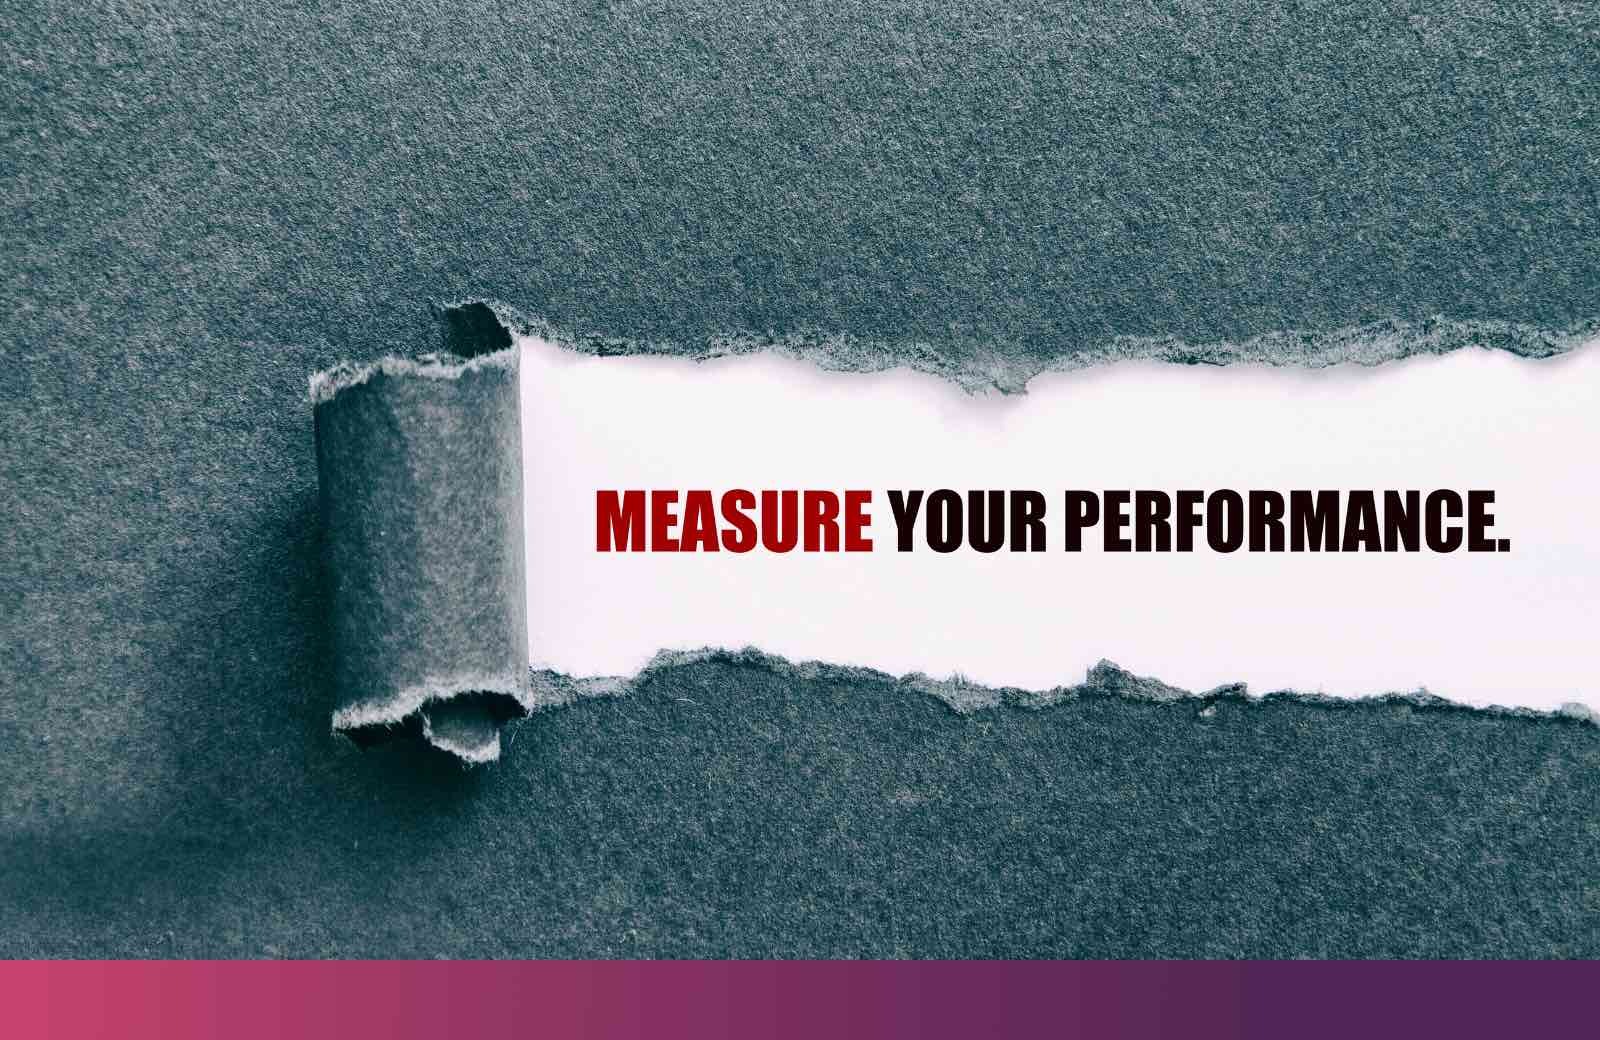 Who performance management benefits the most: You may be surprised!